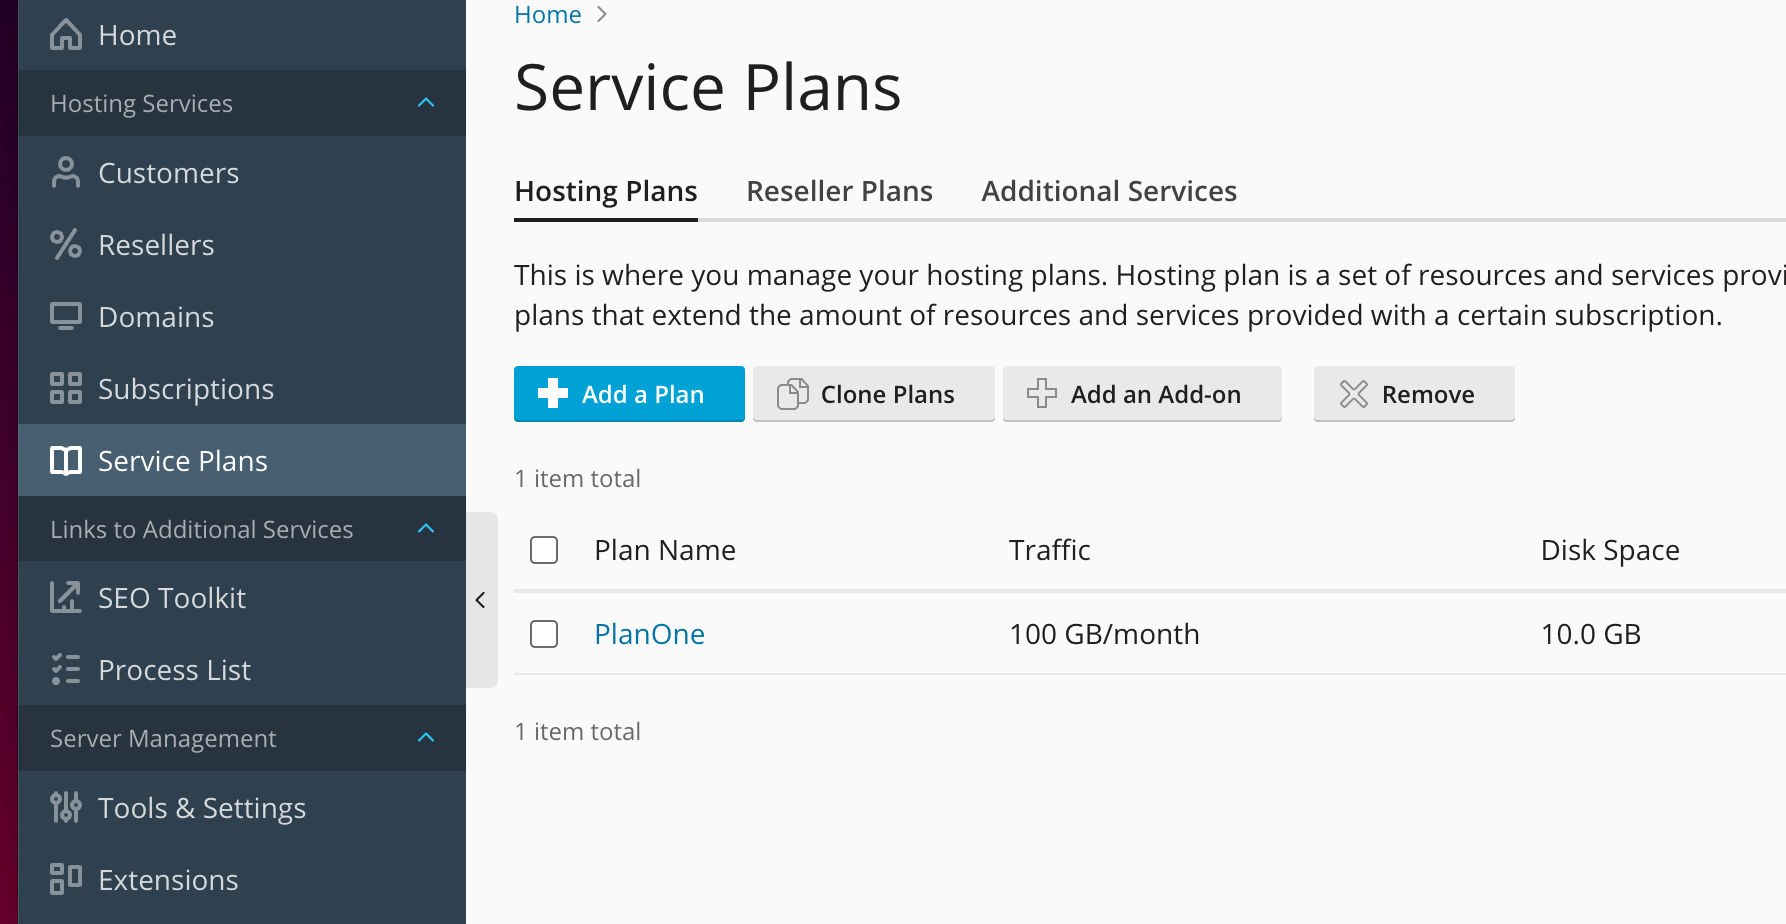 The service plan name here is 'PlanOne'